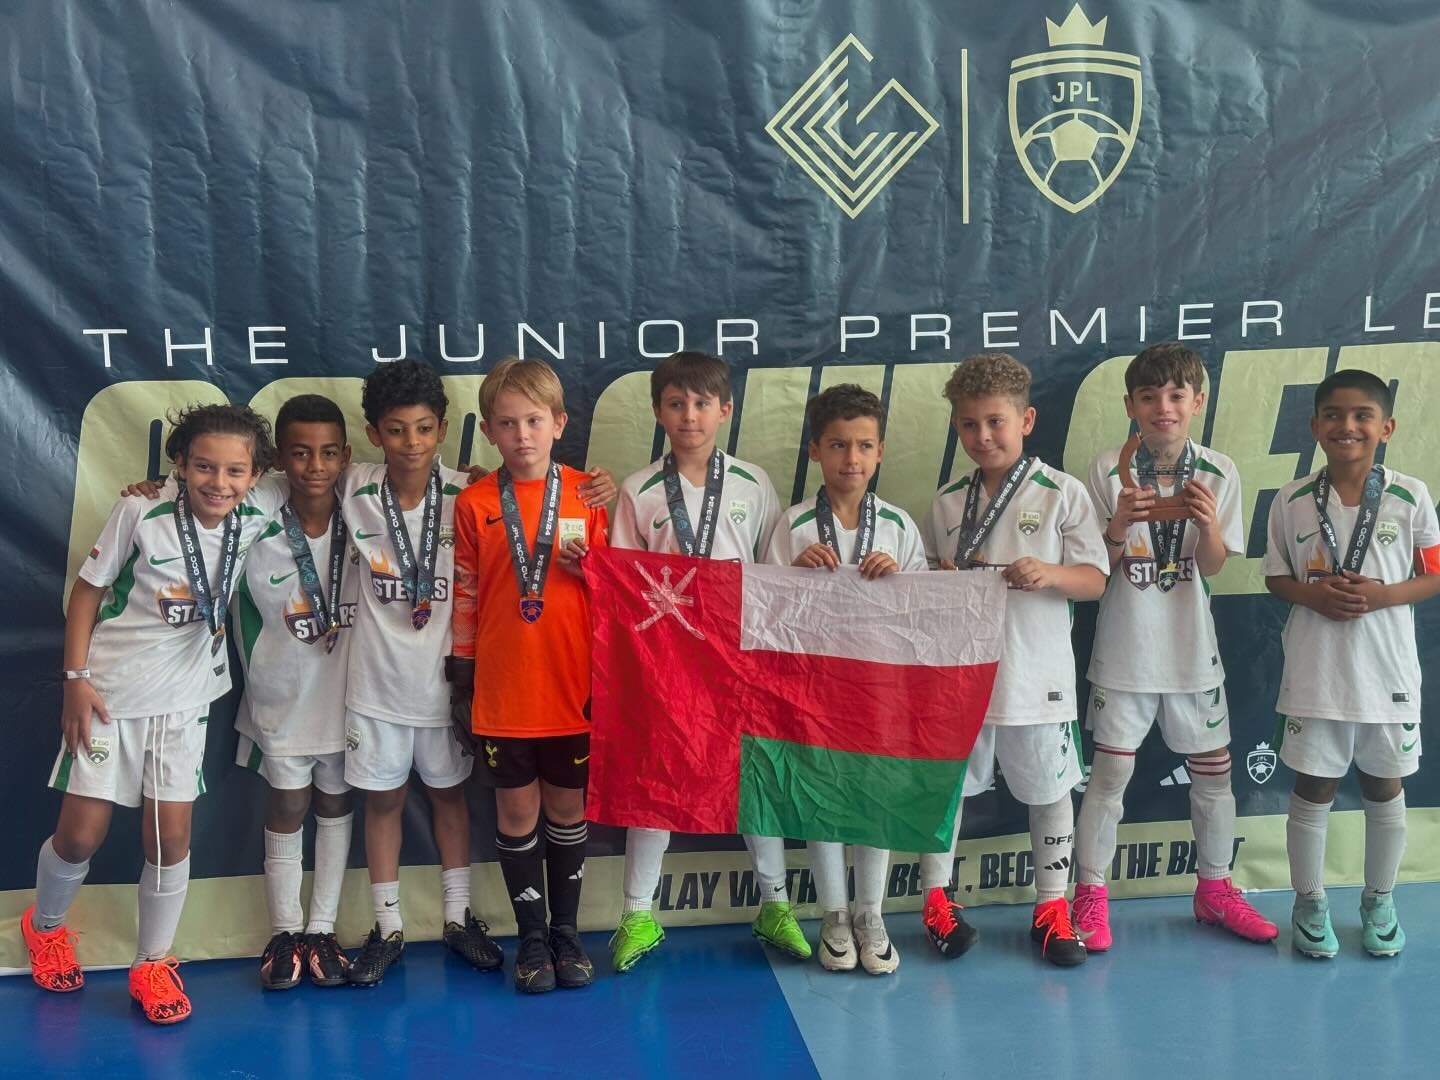 ESG Football Academy Elite U9 boys capped off a fantastic weekend in Abu Dhabi by bringing home the plate cup at the last series of this season&rsquo;s @jpl.gcc Cup.
In what was a very tough weekend,  the boys performances did not go unnoticed playin